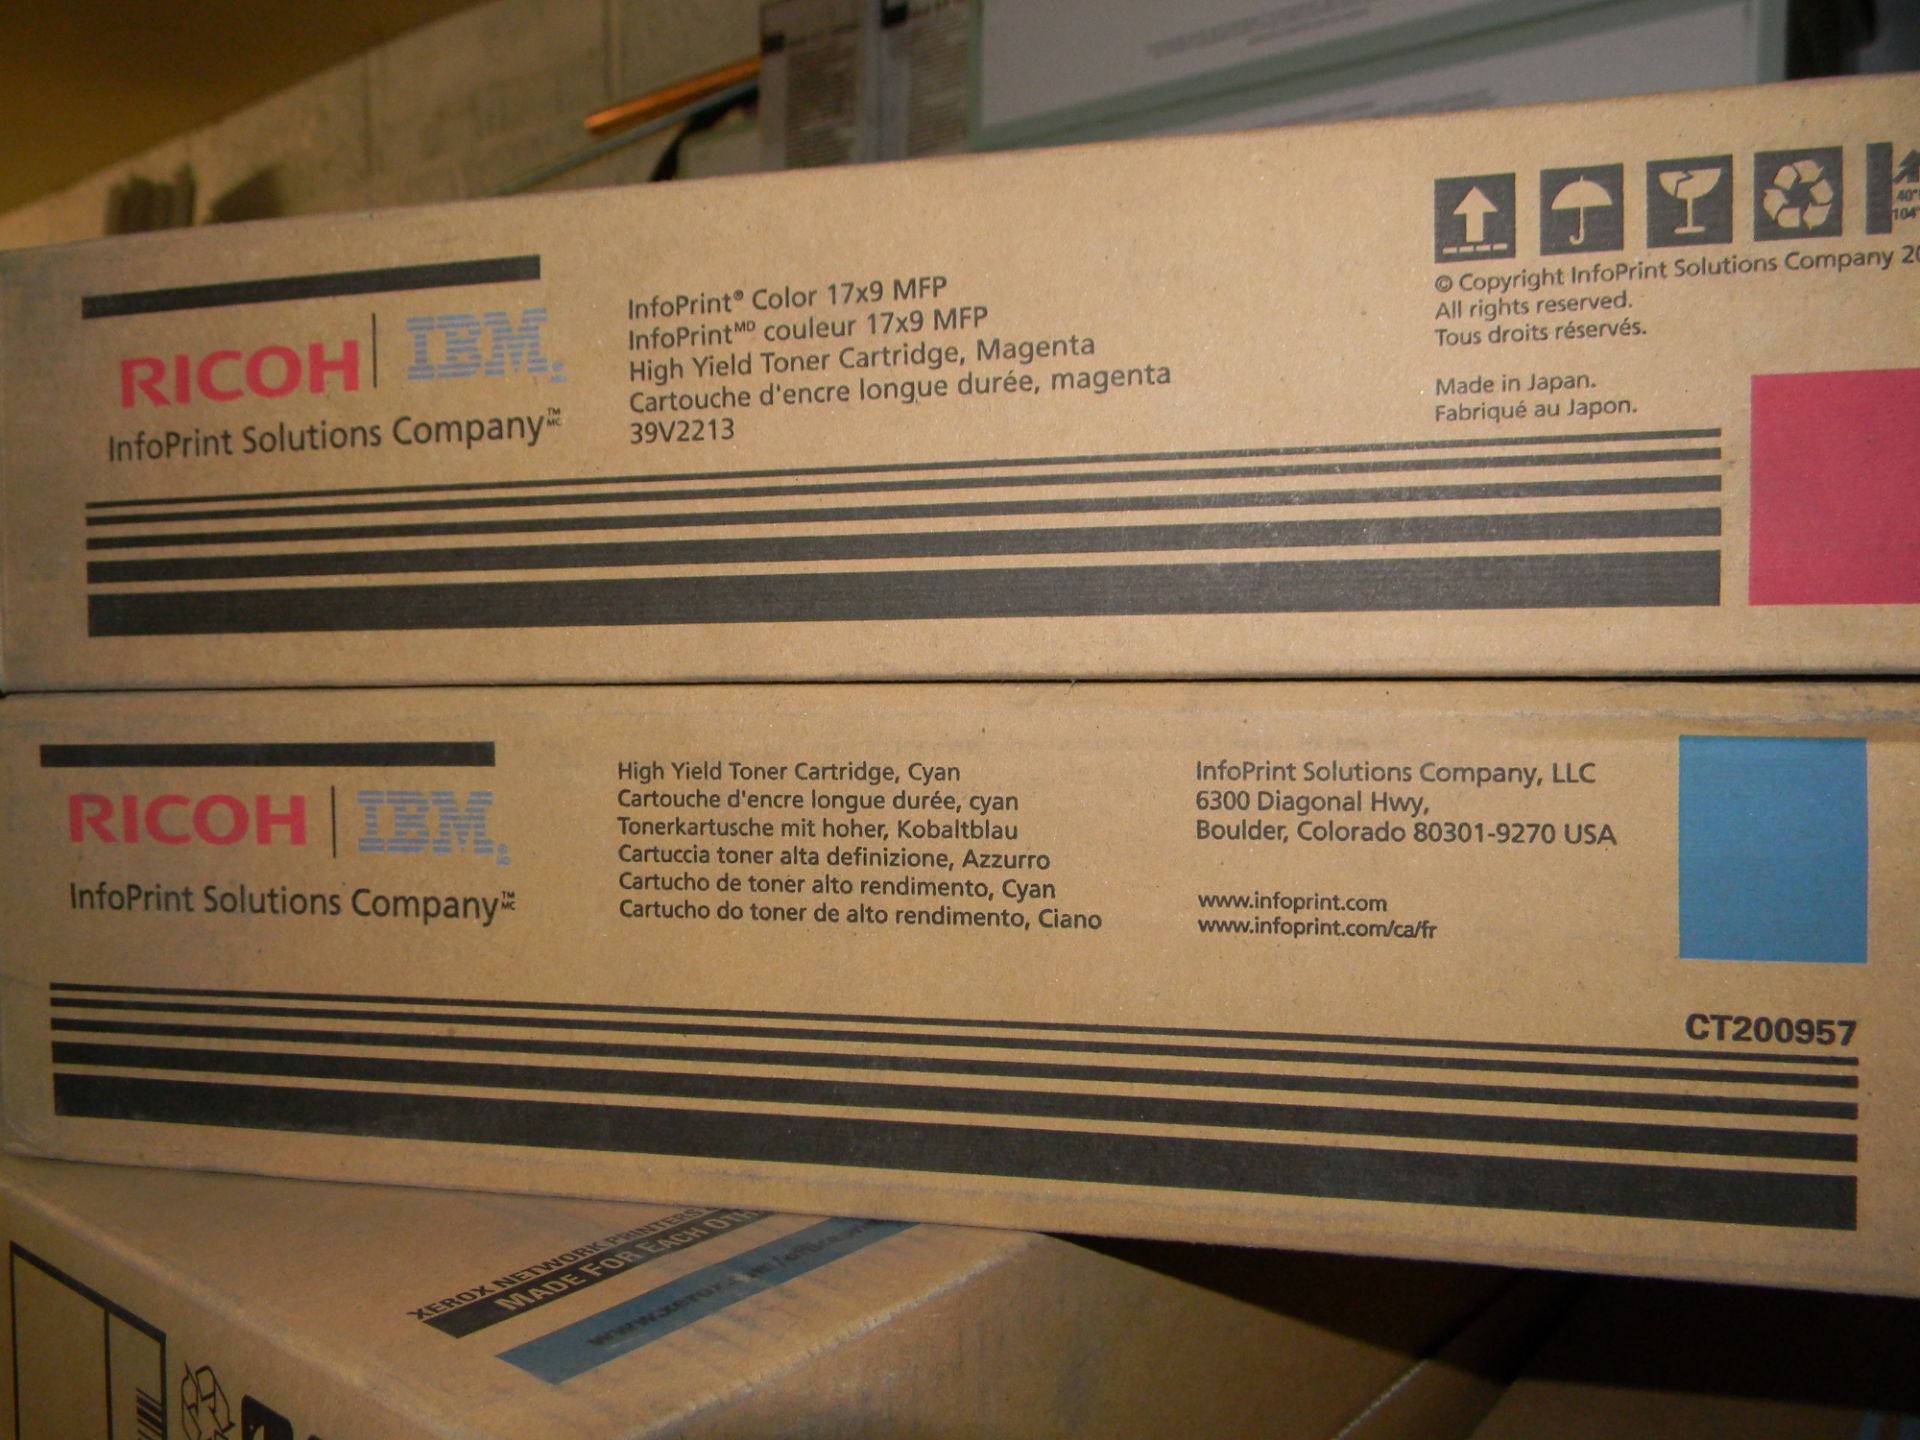 Ricoh/IBM Colour Toner for InfoPoint Color 17x9 MFP (1 x Magenta & 1 x Cyan)